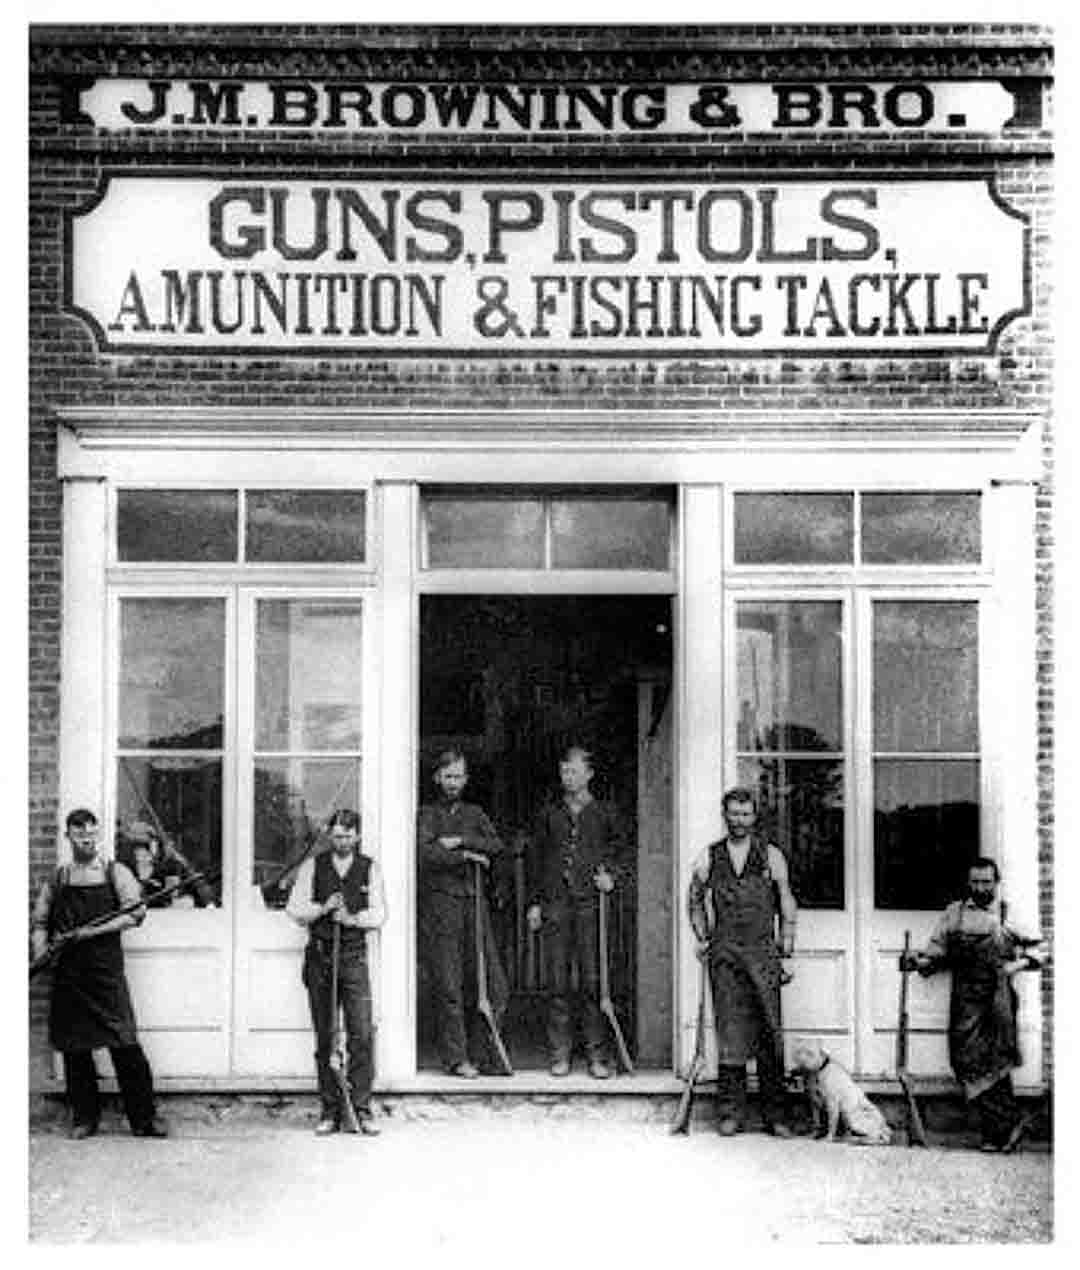 The Browning store in Utah. Workman are out showing their wares all dressed for a day’s work. Note the sign with the misspelling of “ammunition.”